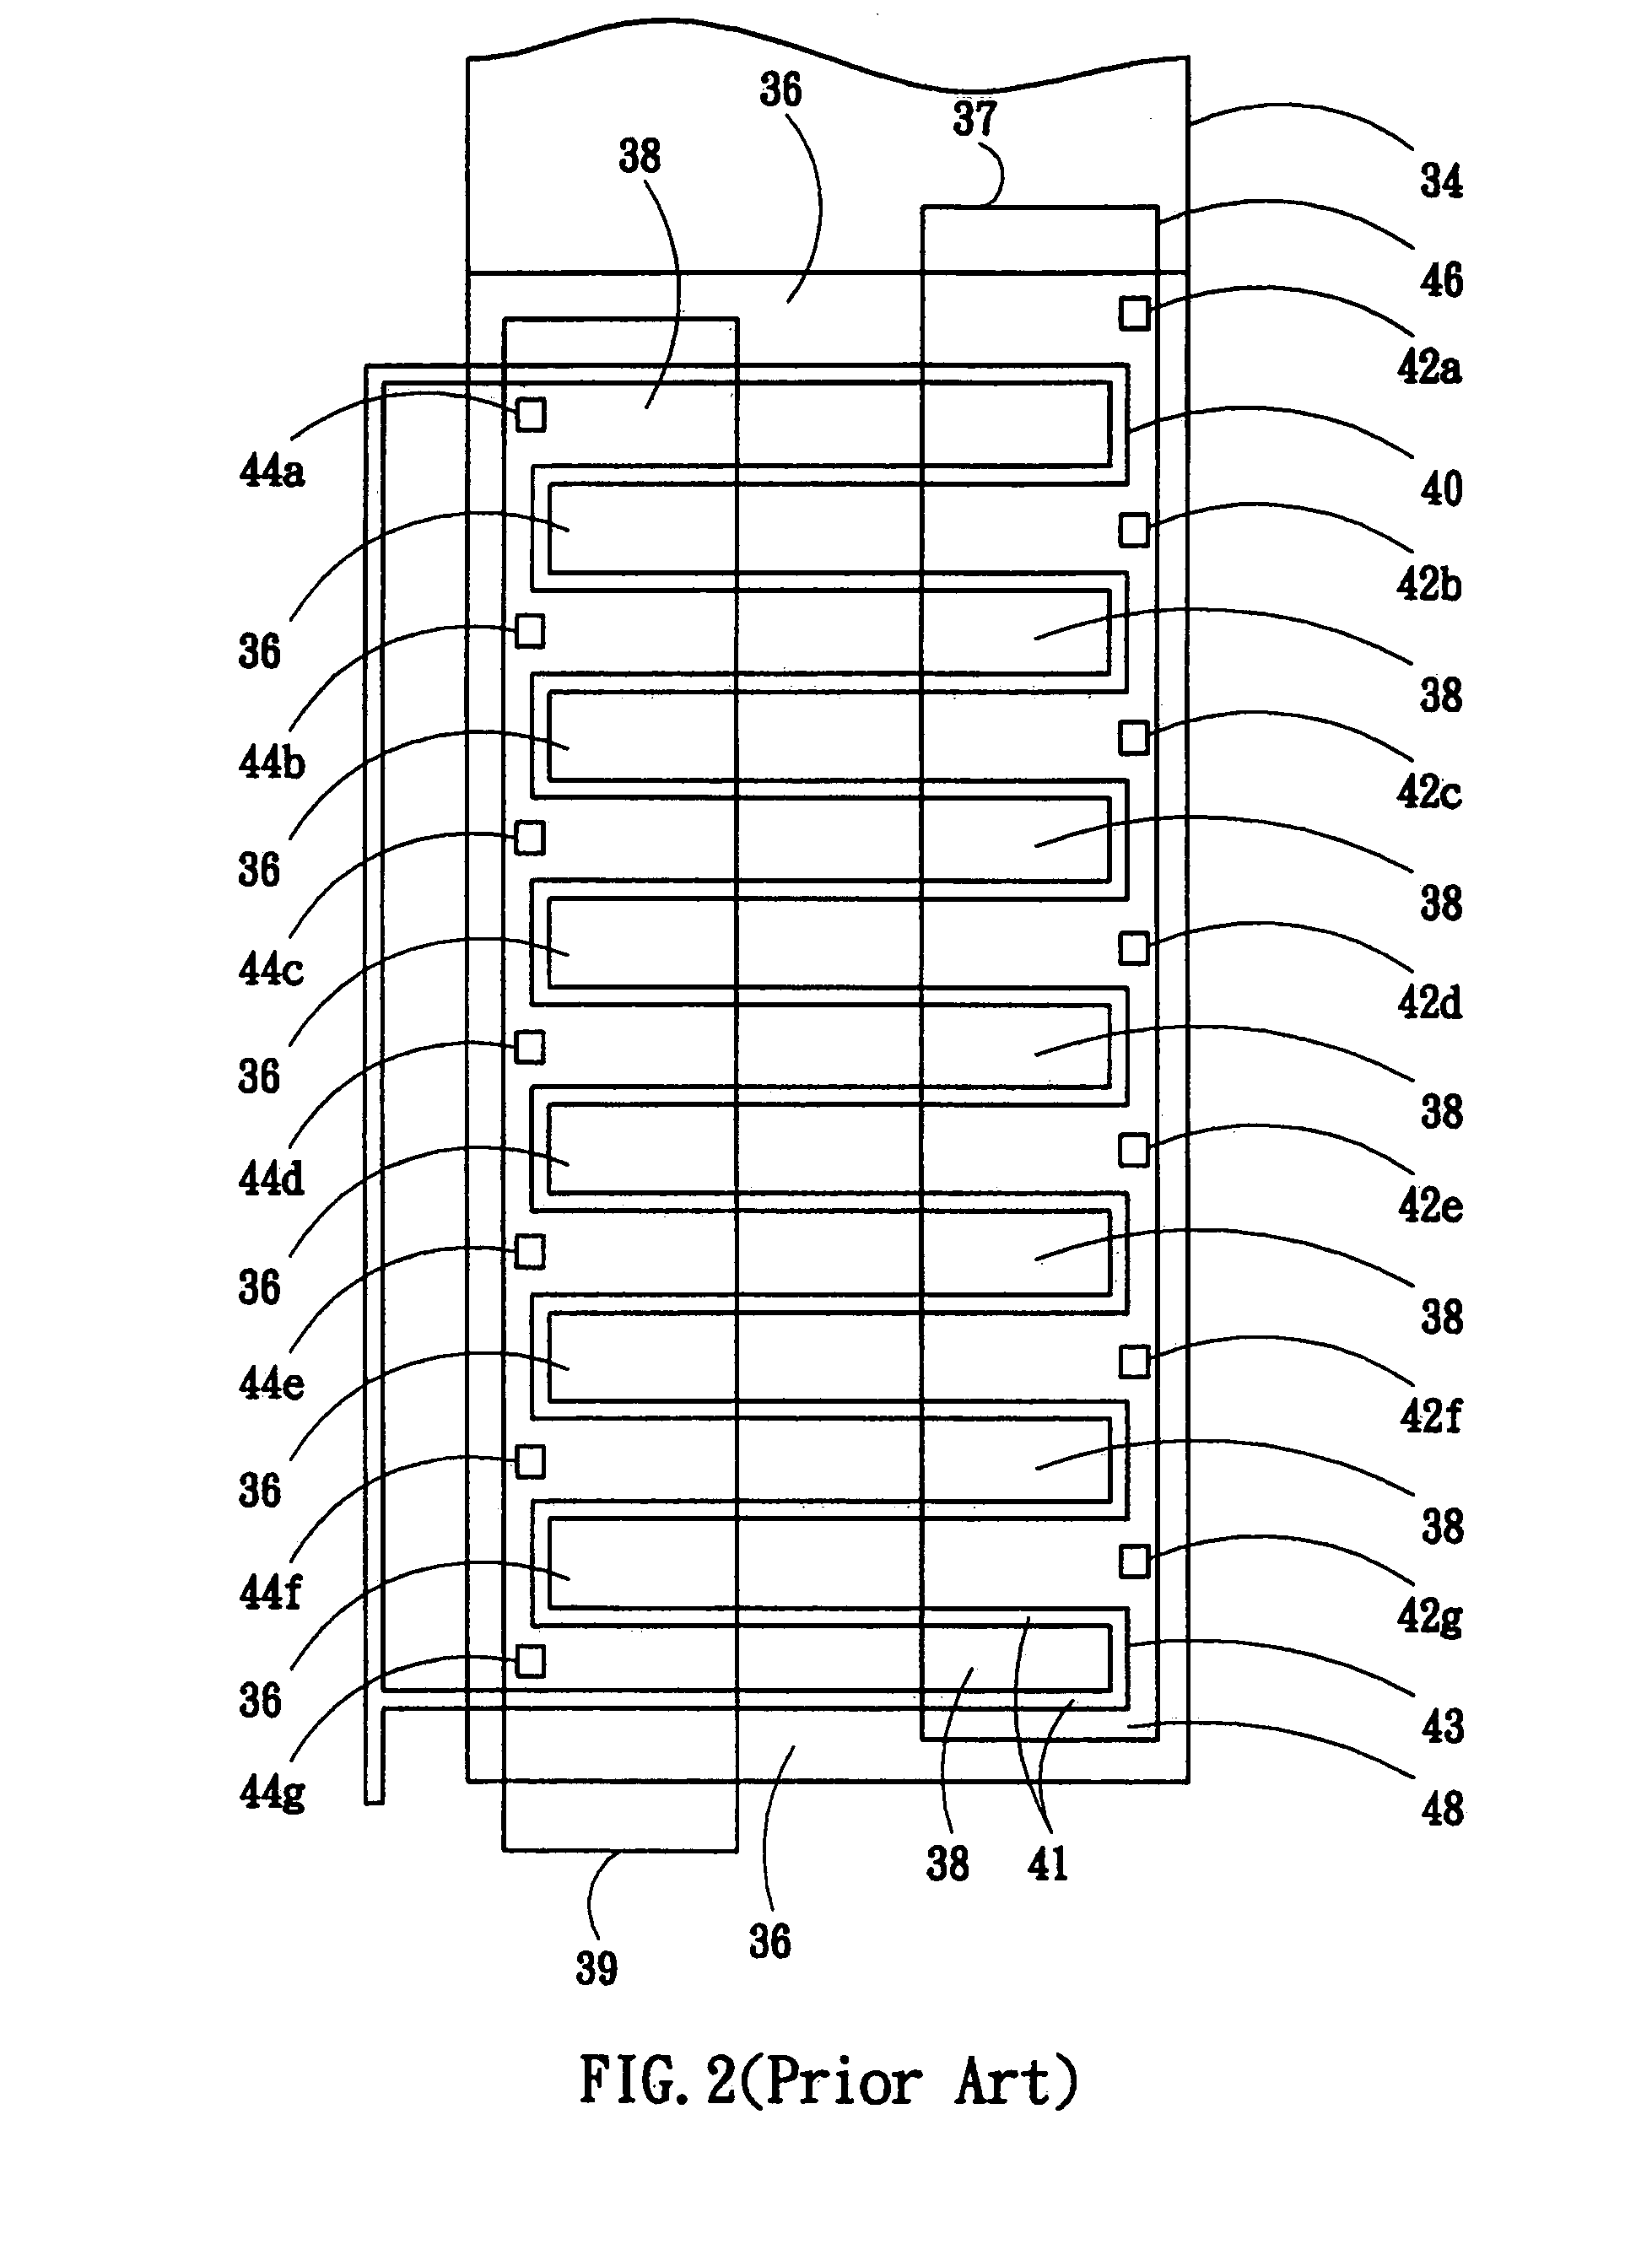 Power metal oxide semiconductor transistor layout with lower output resistance and high current limit